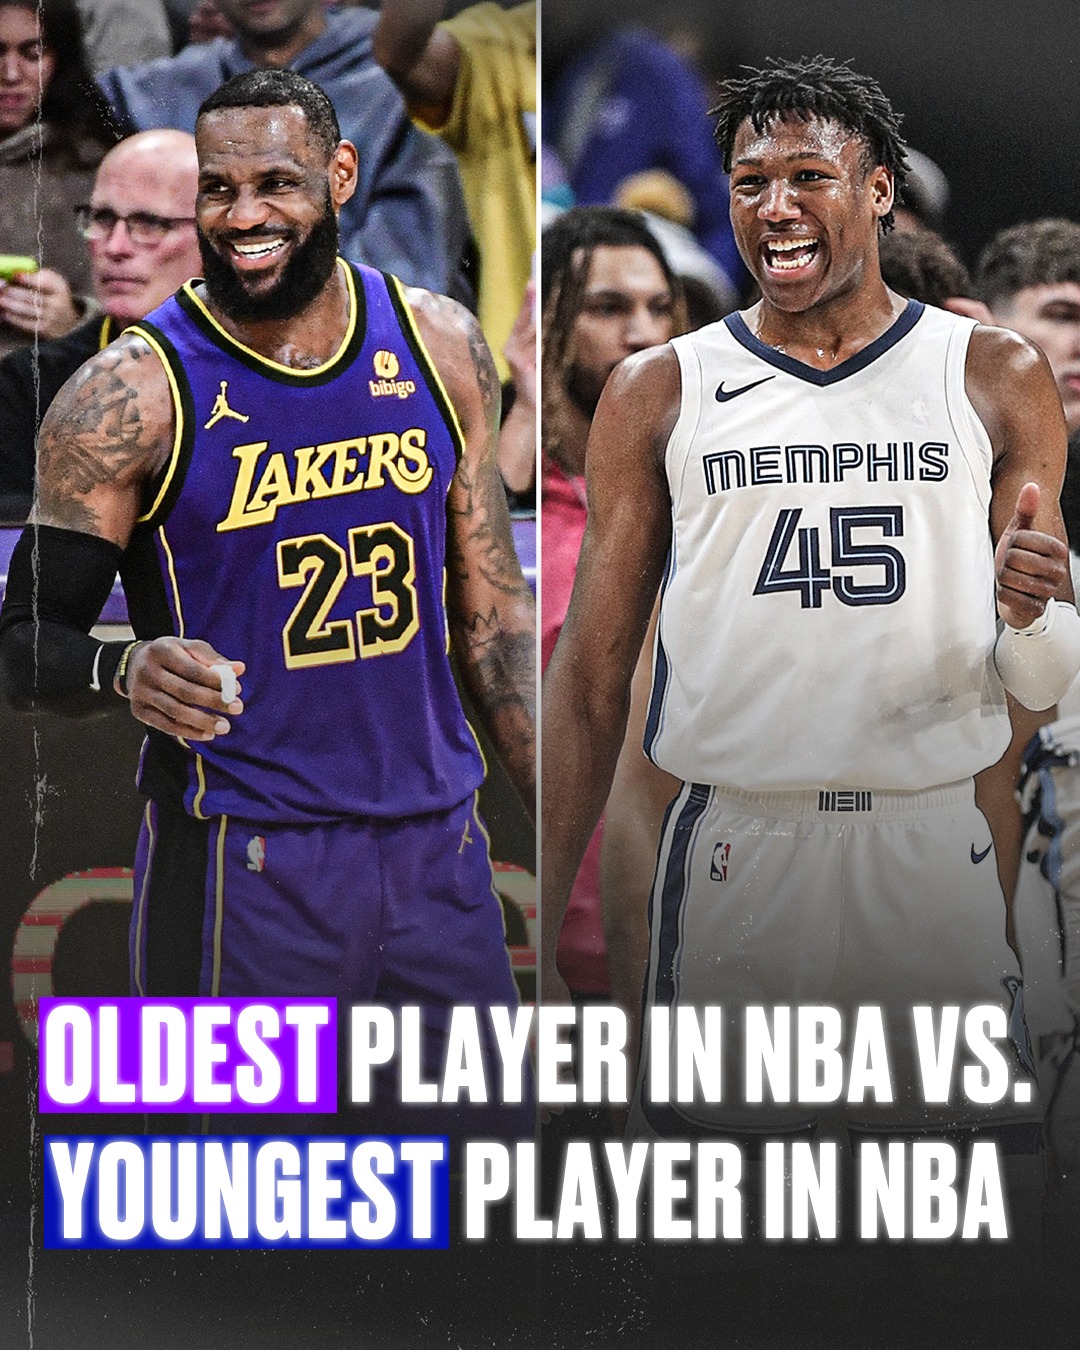 May be an image of ‎2 people, people playing basketball, basketball jersey and ‎text that says "‎RAGSOH سty bibigo LAKERS 23 MEMPHIS 45 OLDEST PLAYER IN NBA VS. YOUNGEST PLAYER IN NBA‎"‎‎